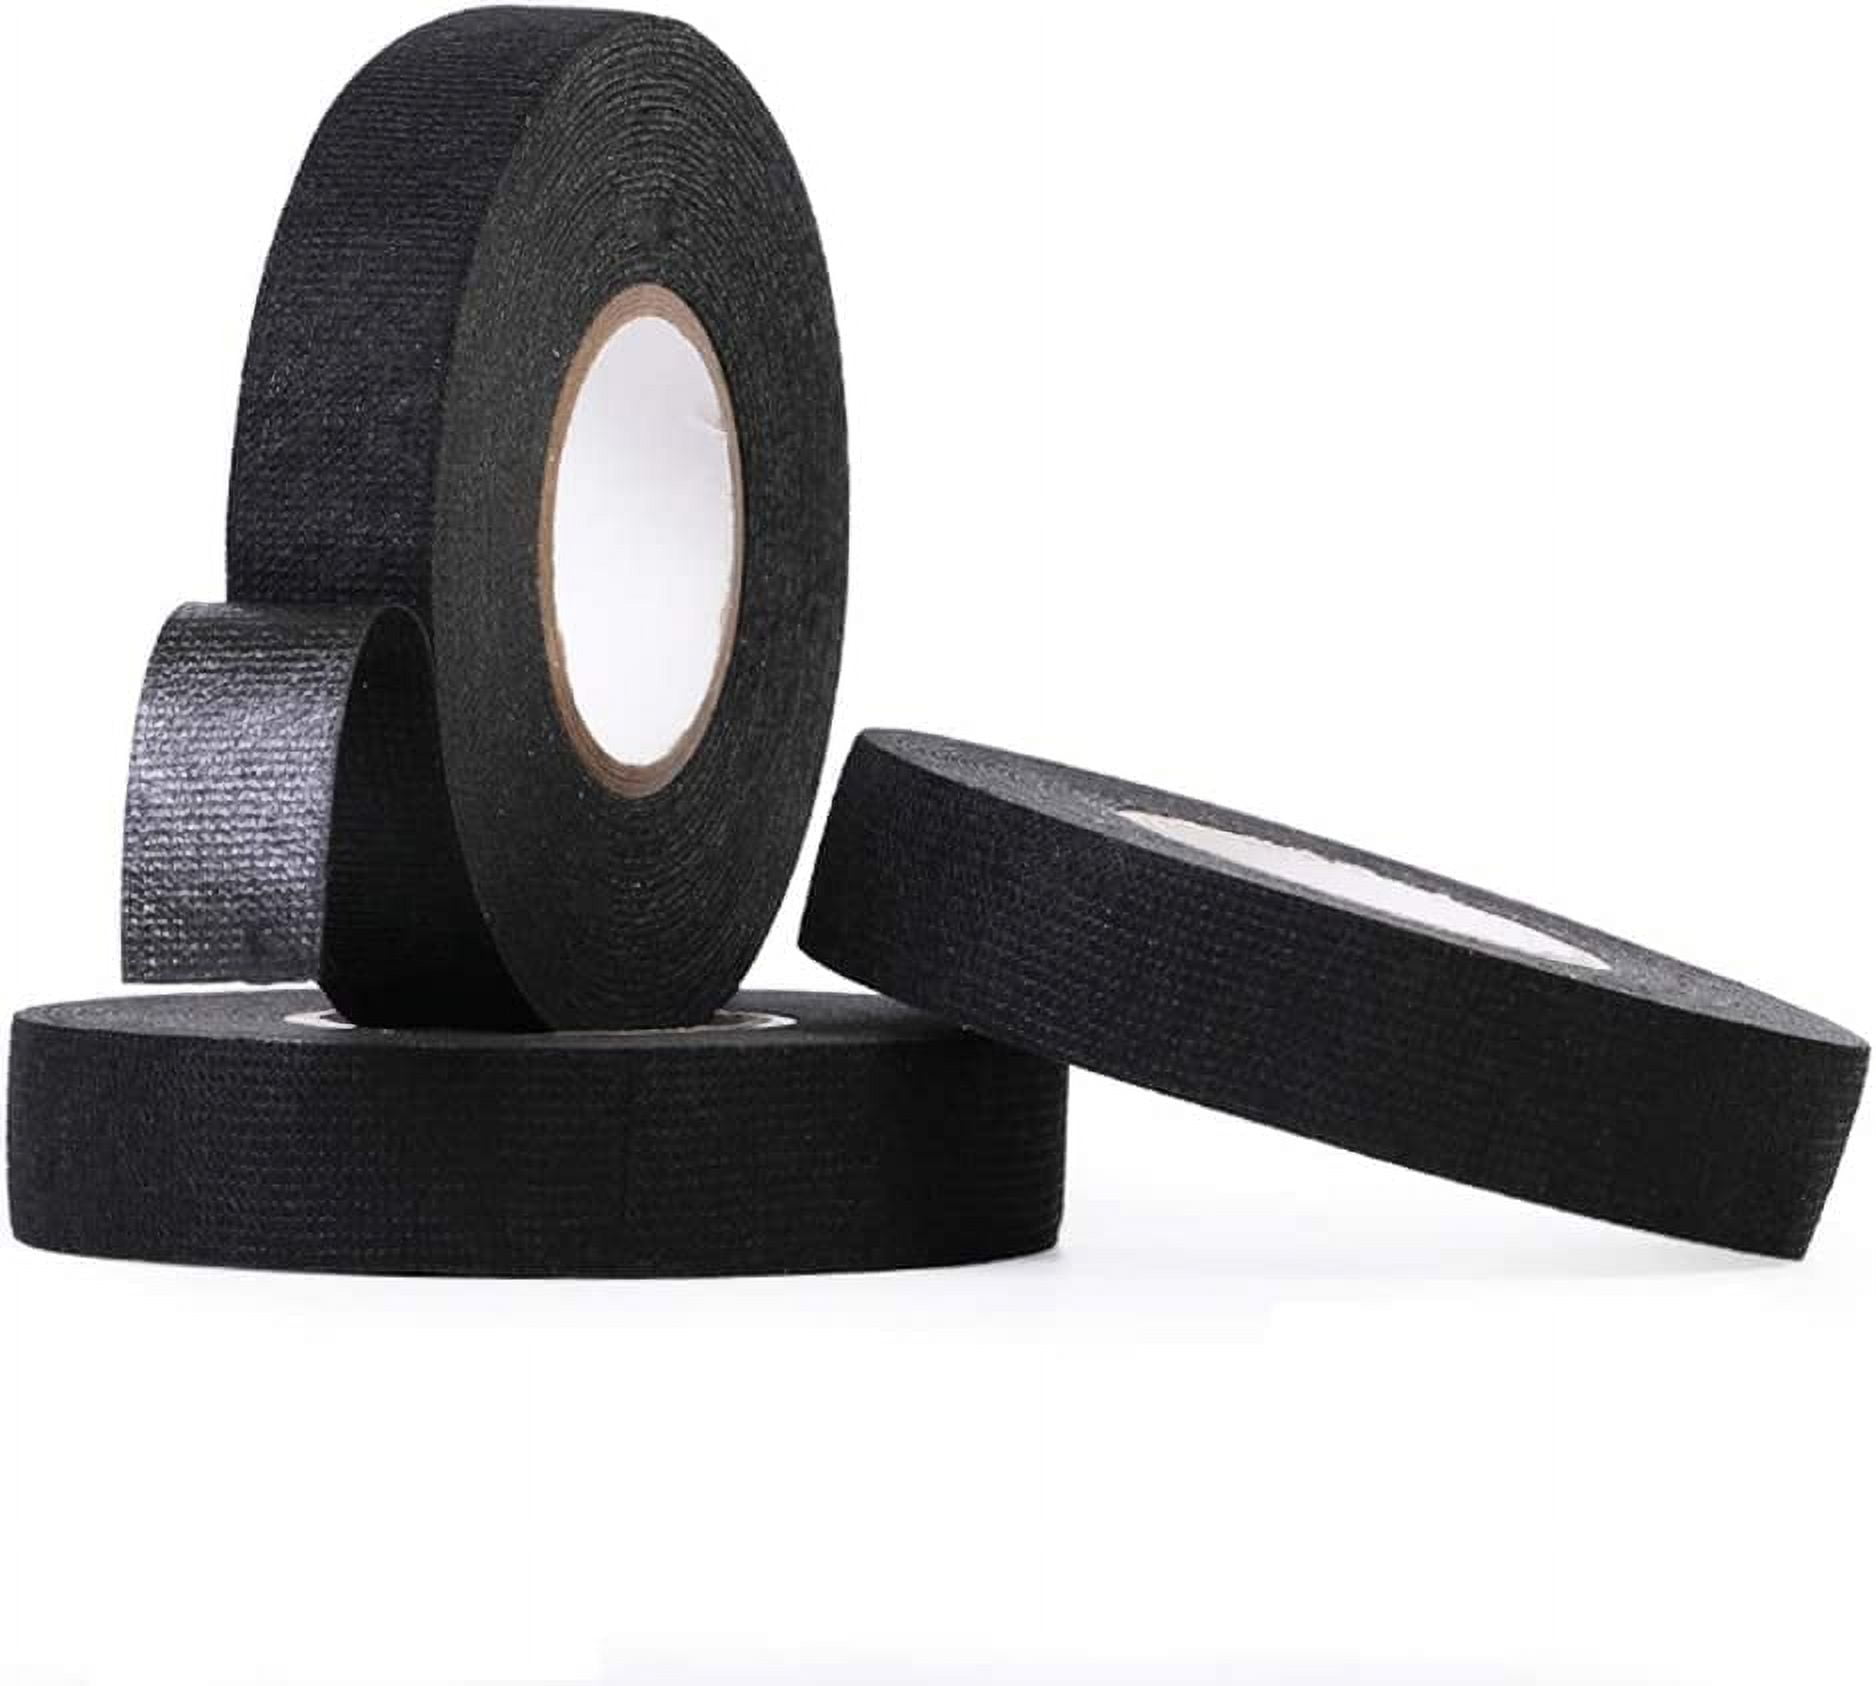 Black Fabric Tape for Wiring Harness 2x 1520M *19mm Leave No Sticky Residue